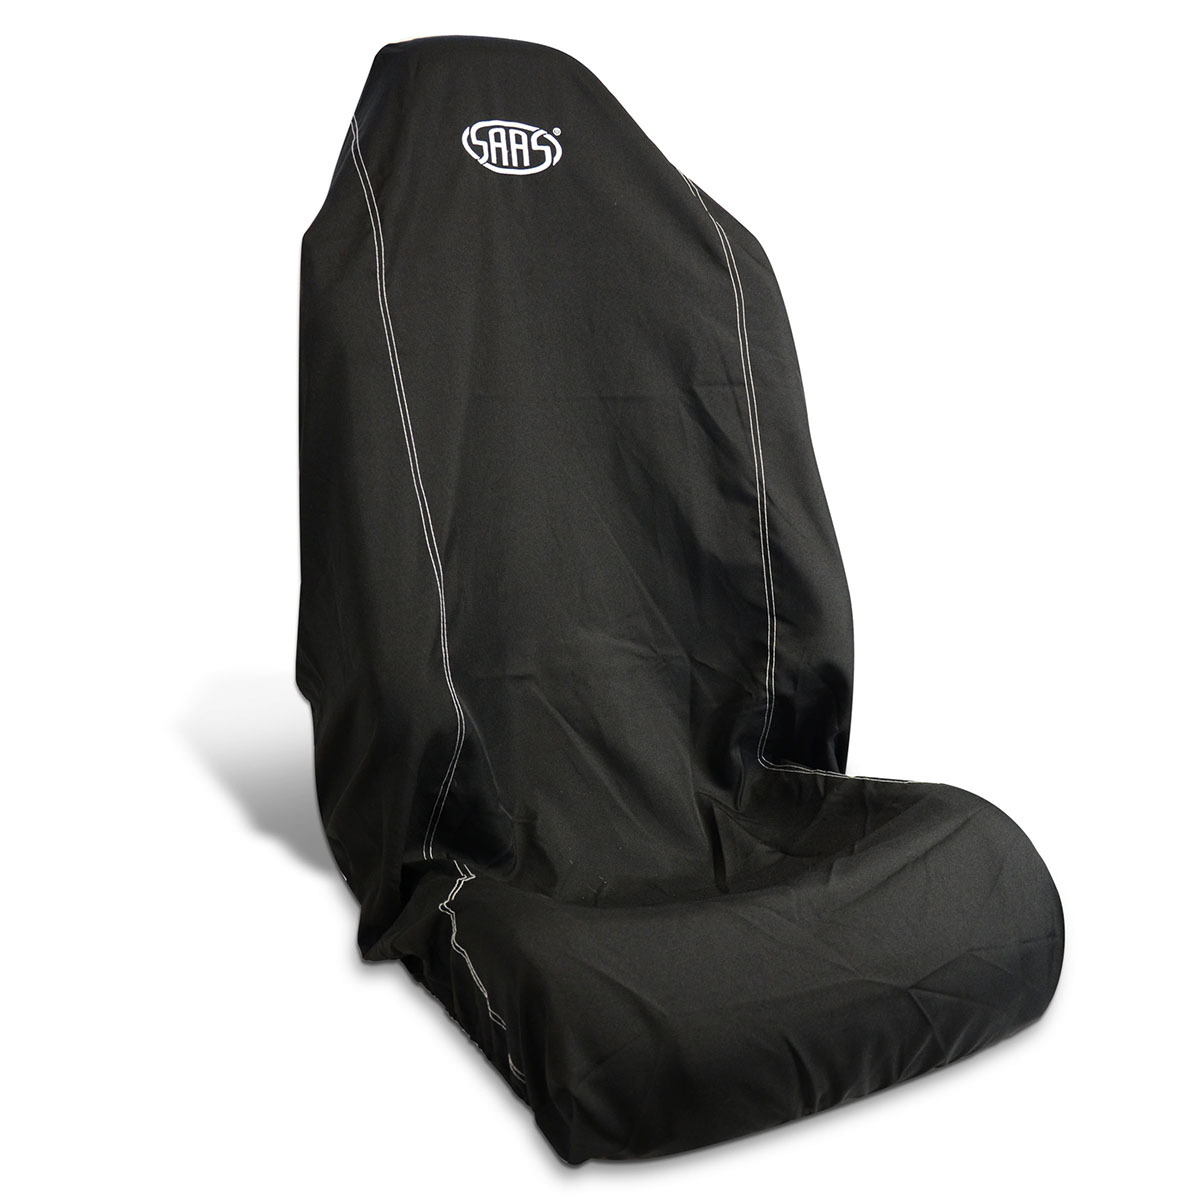 SAAS CAR SEAT COVER THROW OVER BLACK WITH SAAS WHITE LOGO LARGE 1PC SC5011 